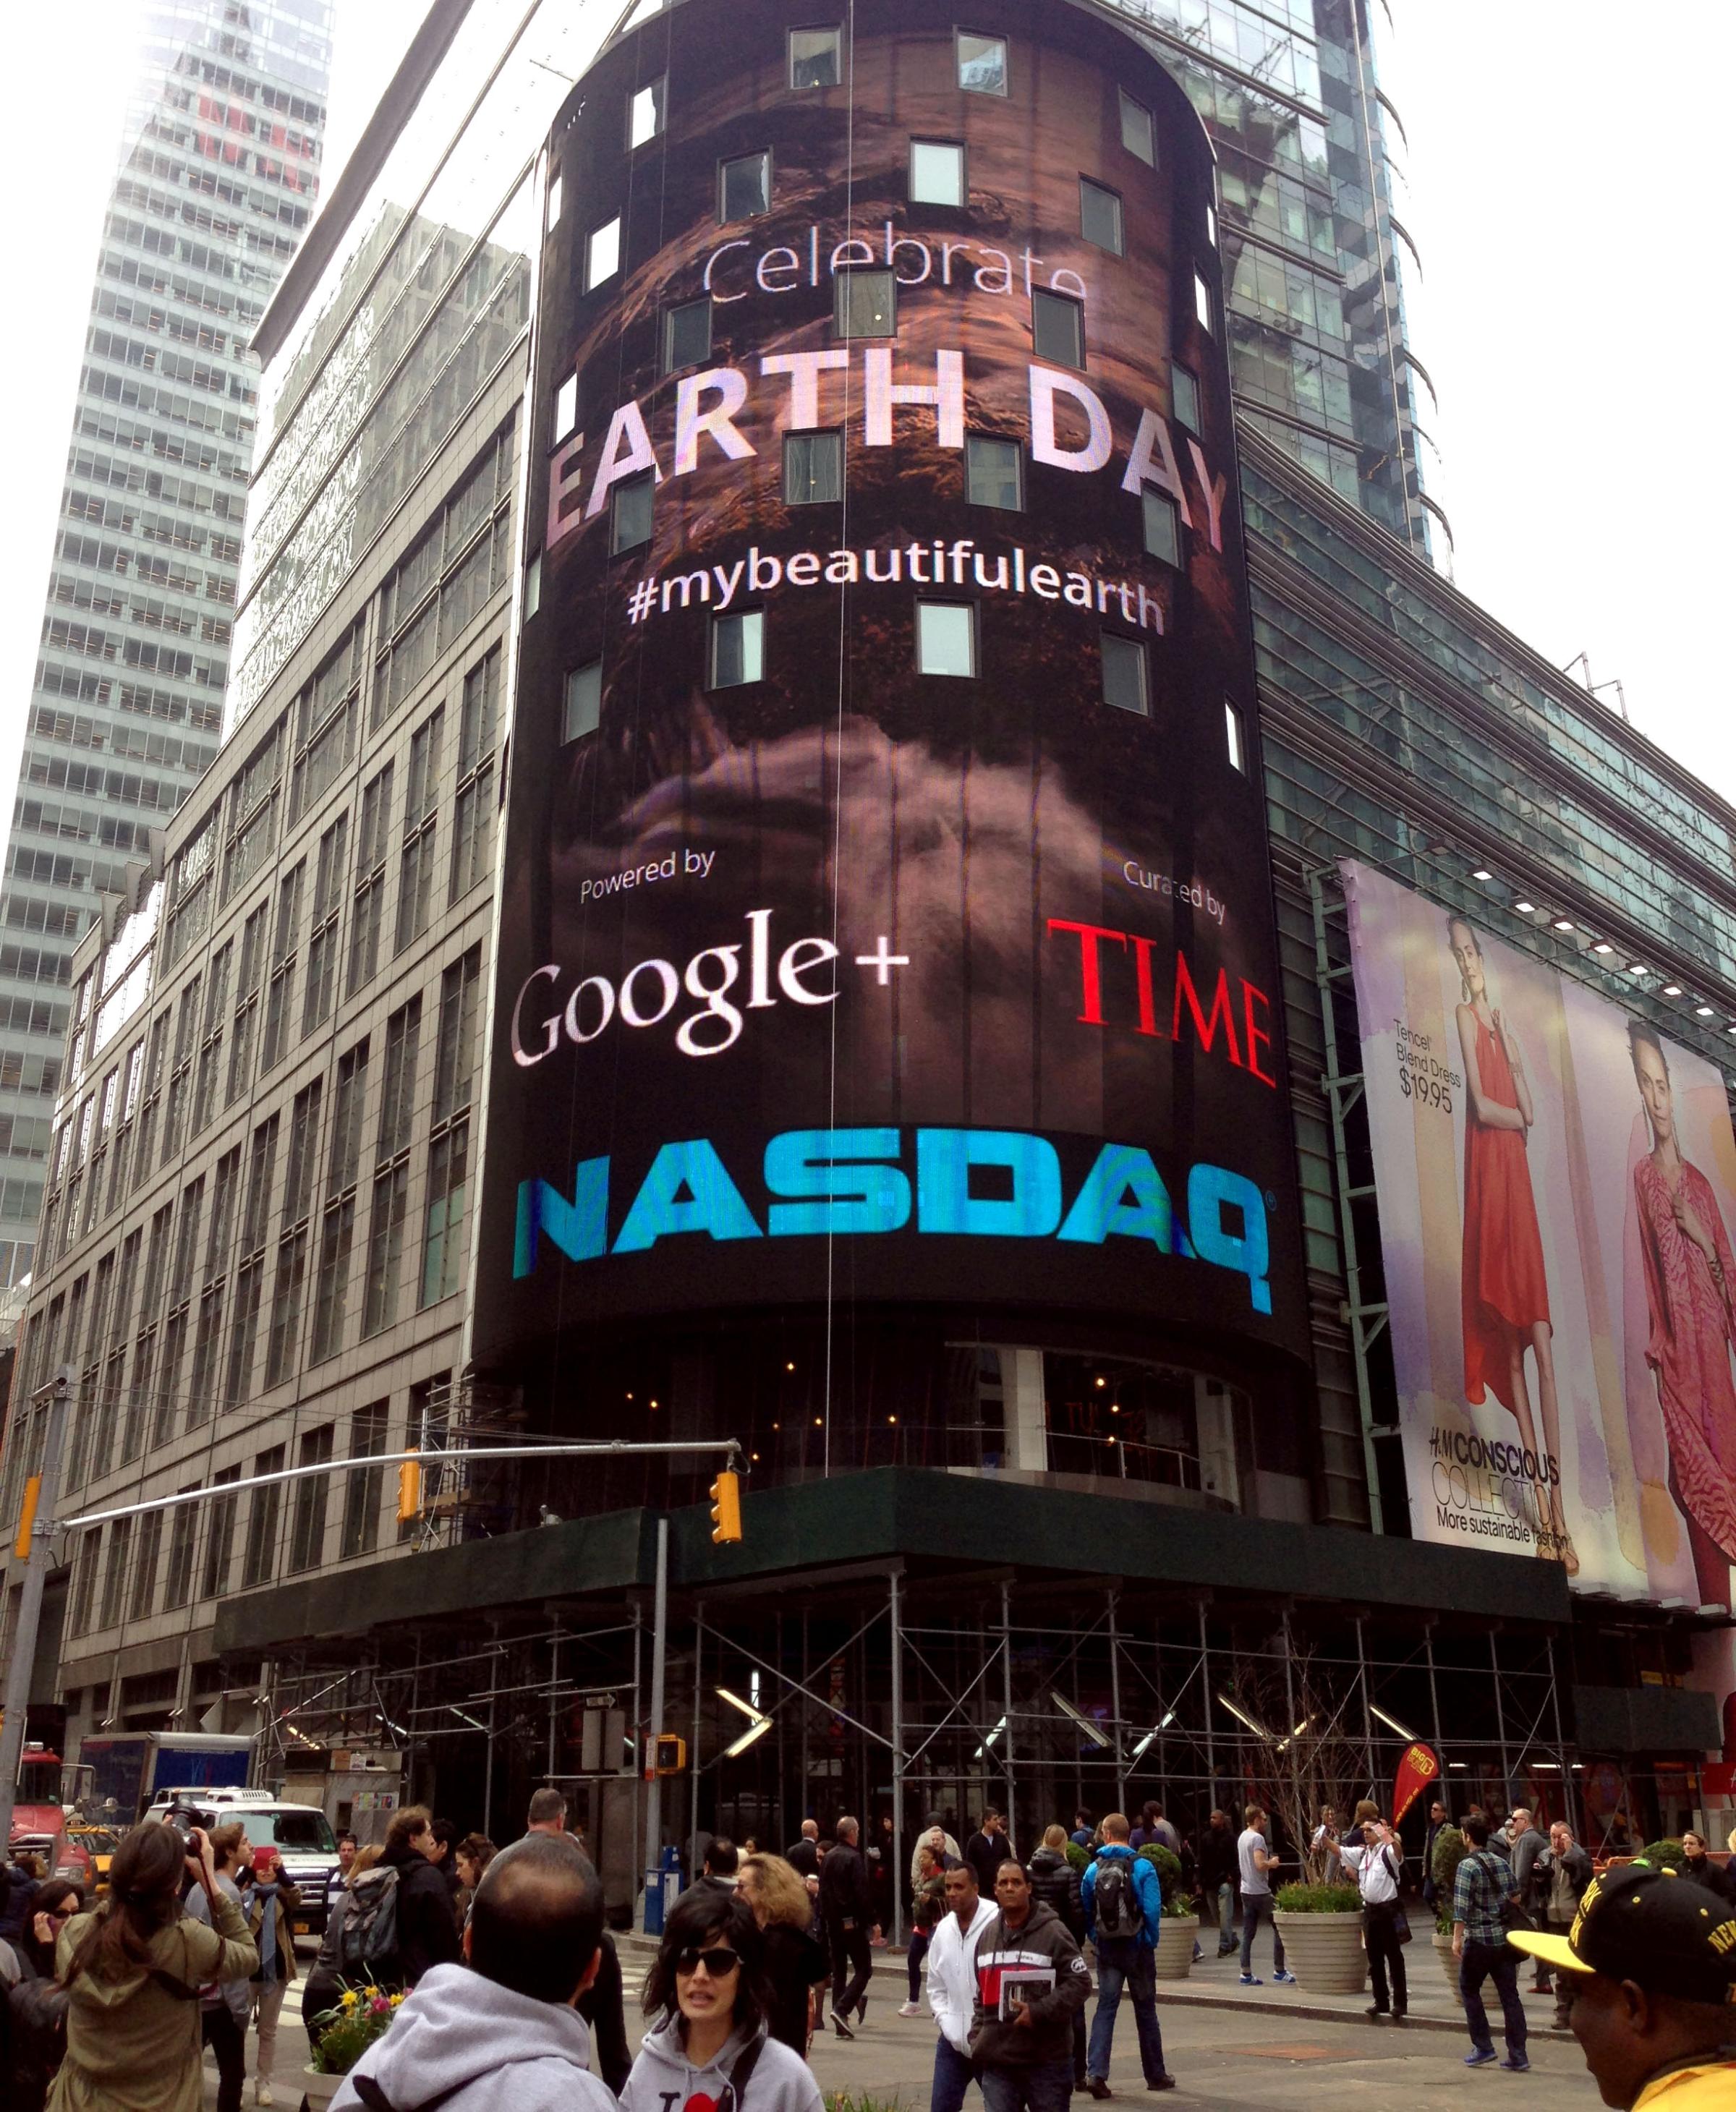 The NASDAQ billboard in Times Square features Google+ users' earth day photos selected by TIME's photo editors.